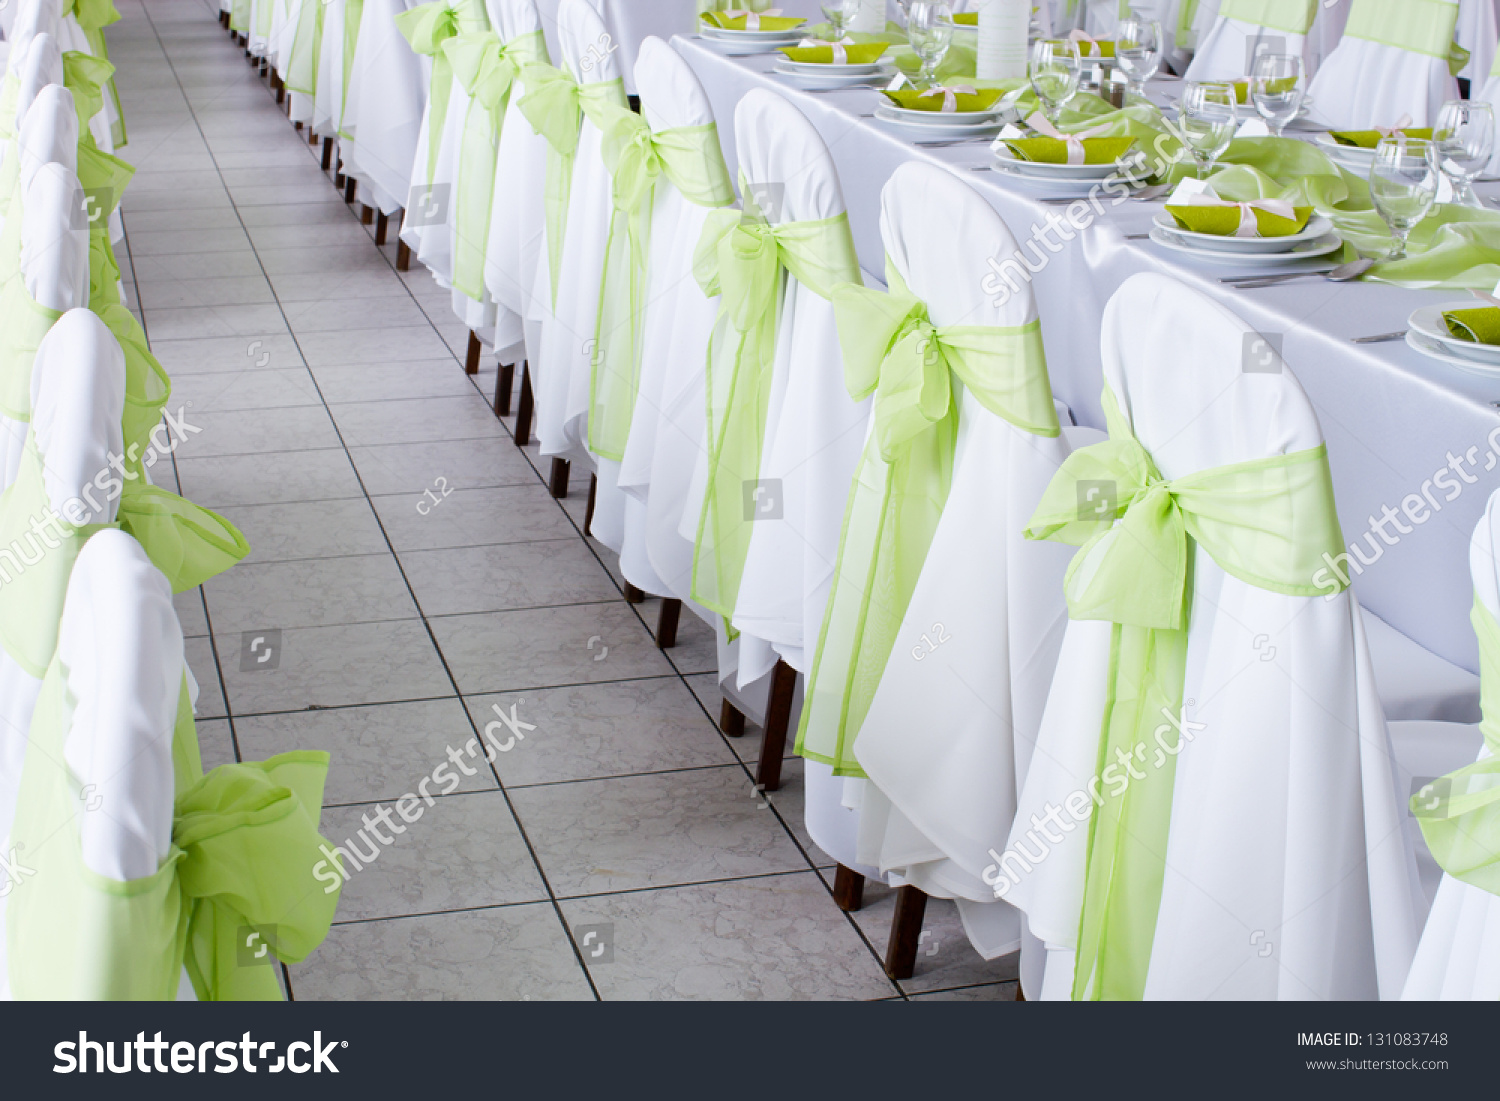 Ribbon Decoration On Wedding Chairs Cover Objects Stock Image